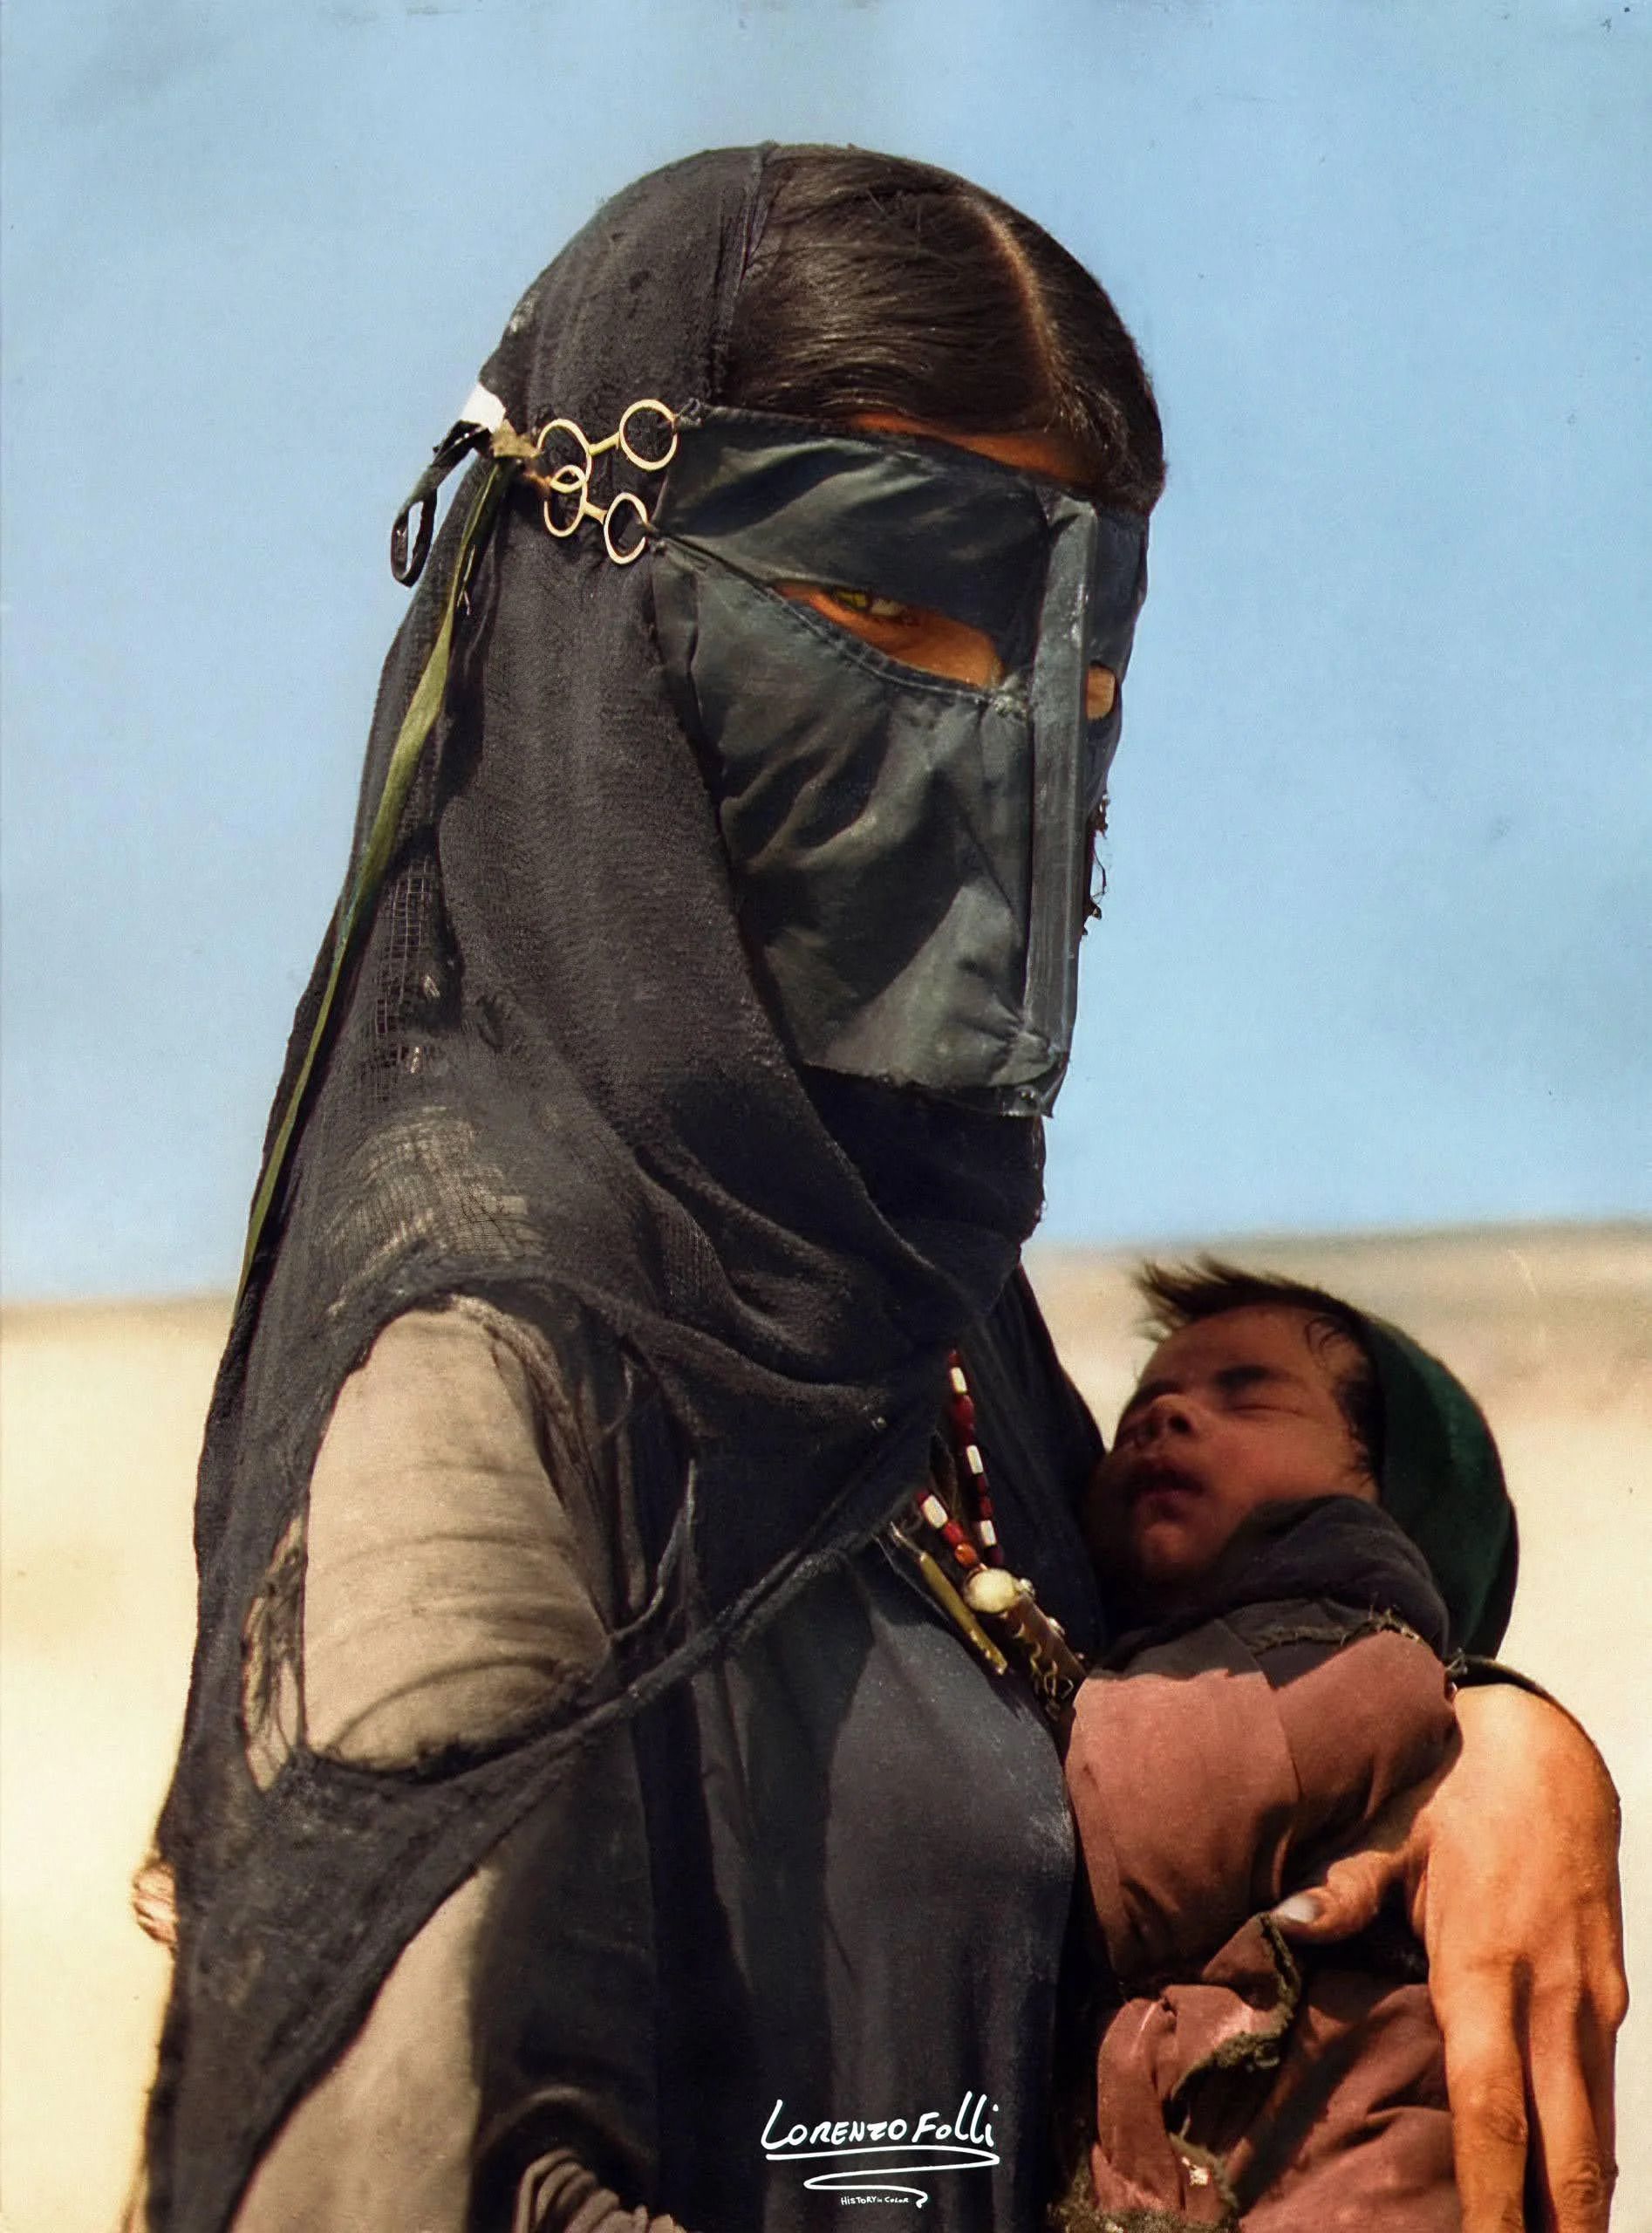 A colorized photo of a bedouin woman and her baby by Lorenzo Folli